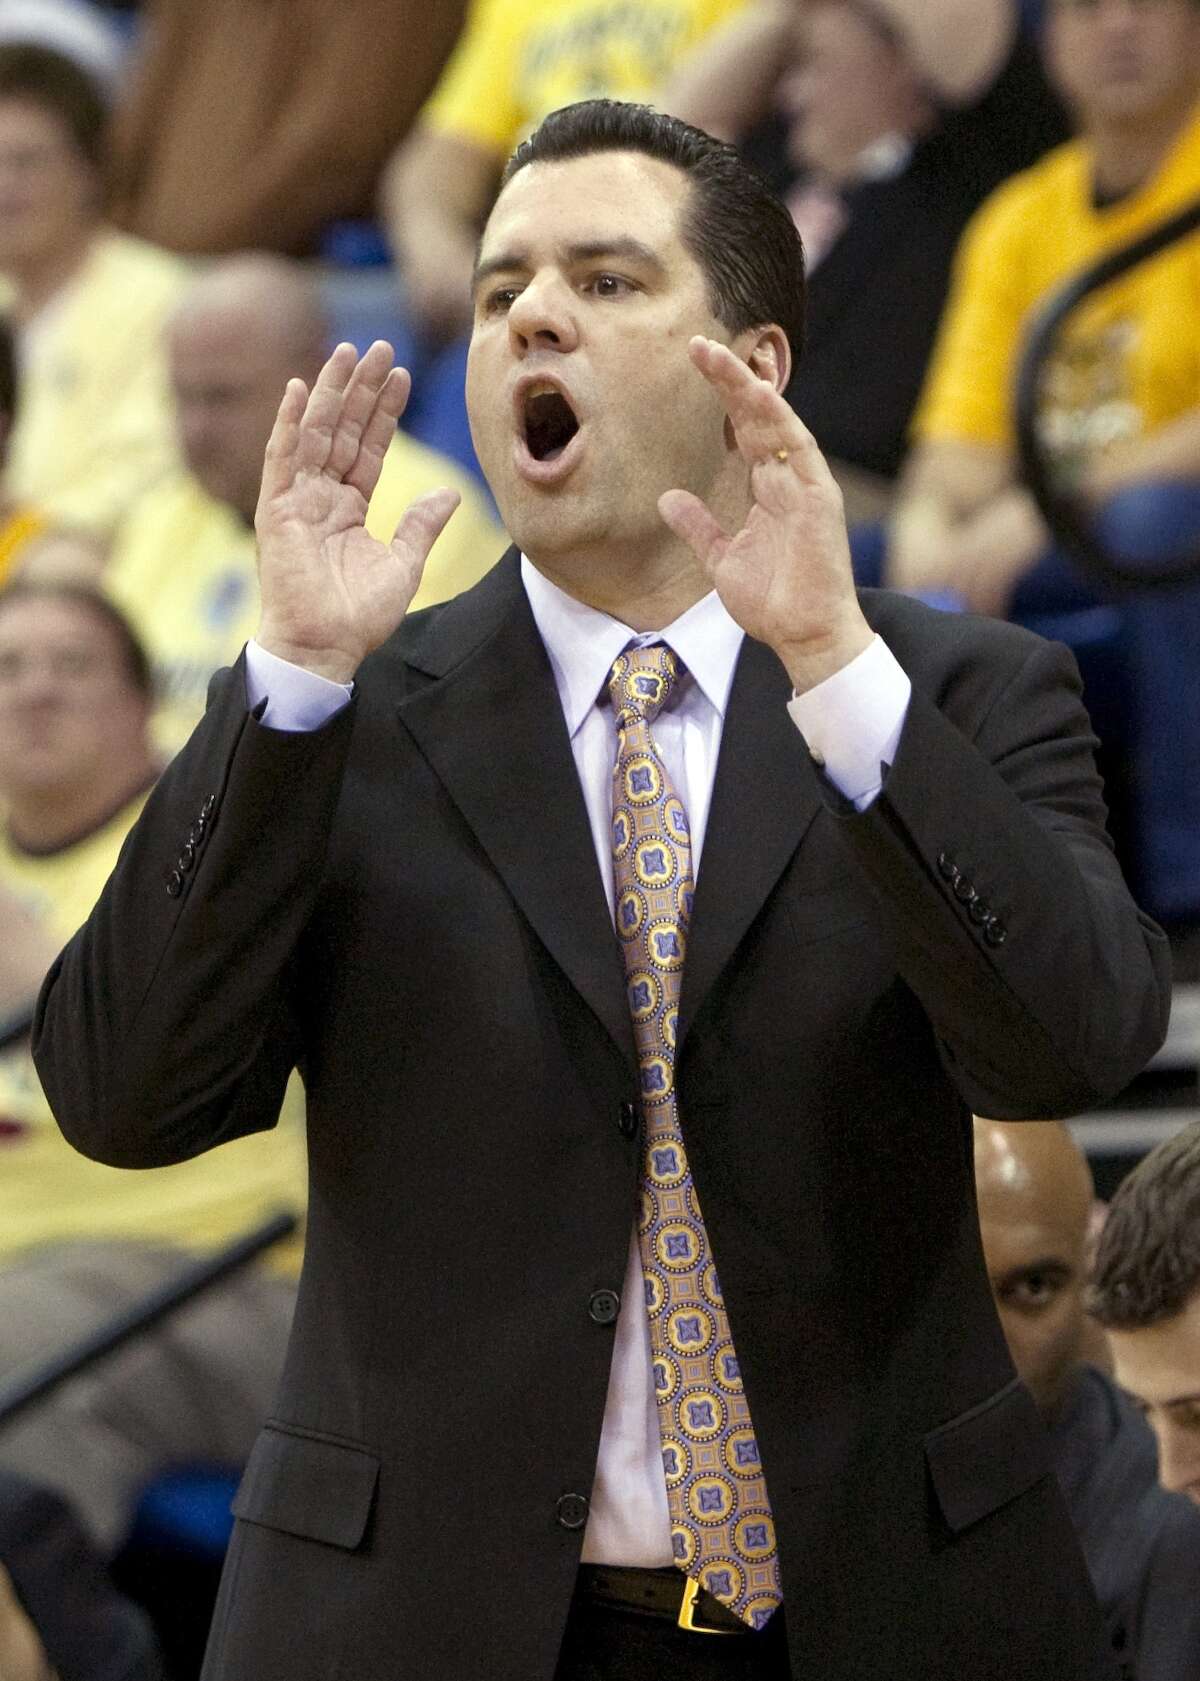 Quinnipiac head coach Tom Moore yells at his team during the first half of the NCAA Northeast Conference college championship basketball game against Robert Morris in Hamden, Conn., Wednesday, March 10, 2010. (AP Photo/Thomas Cain)